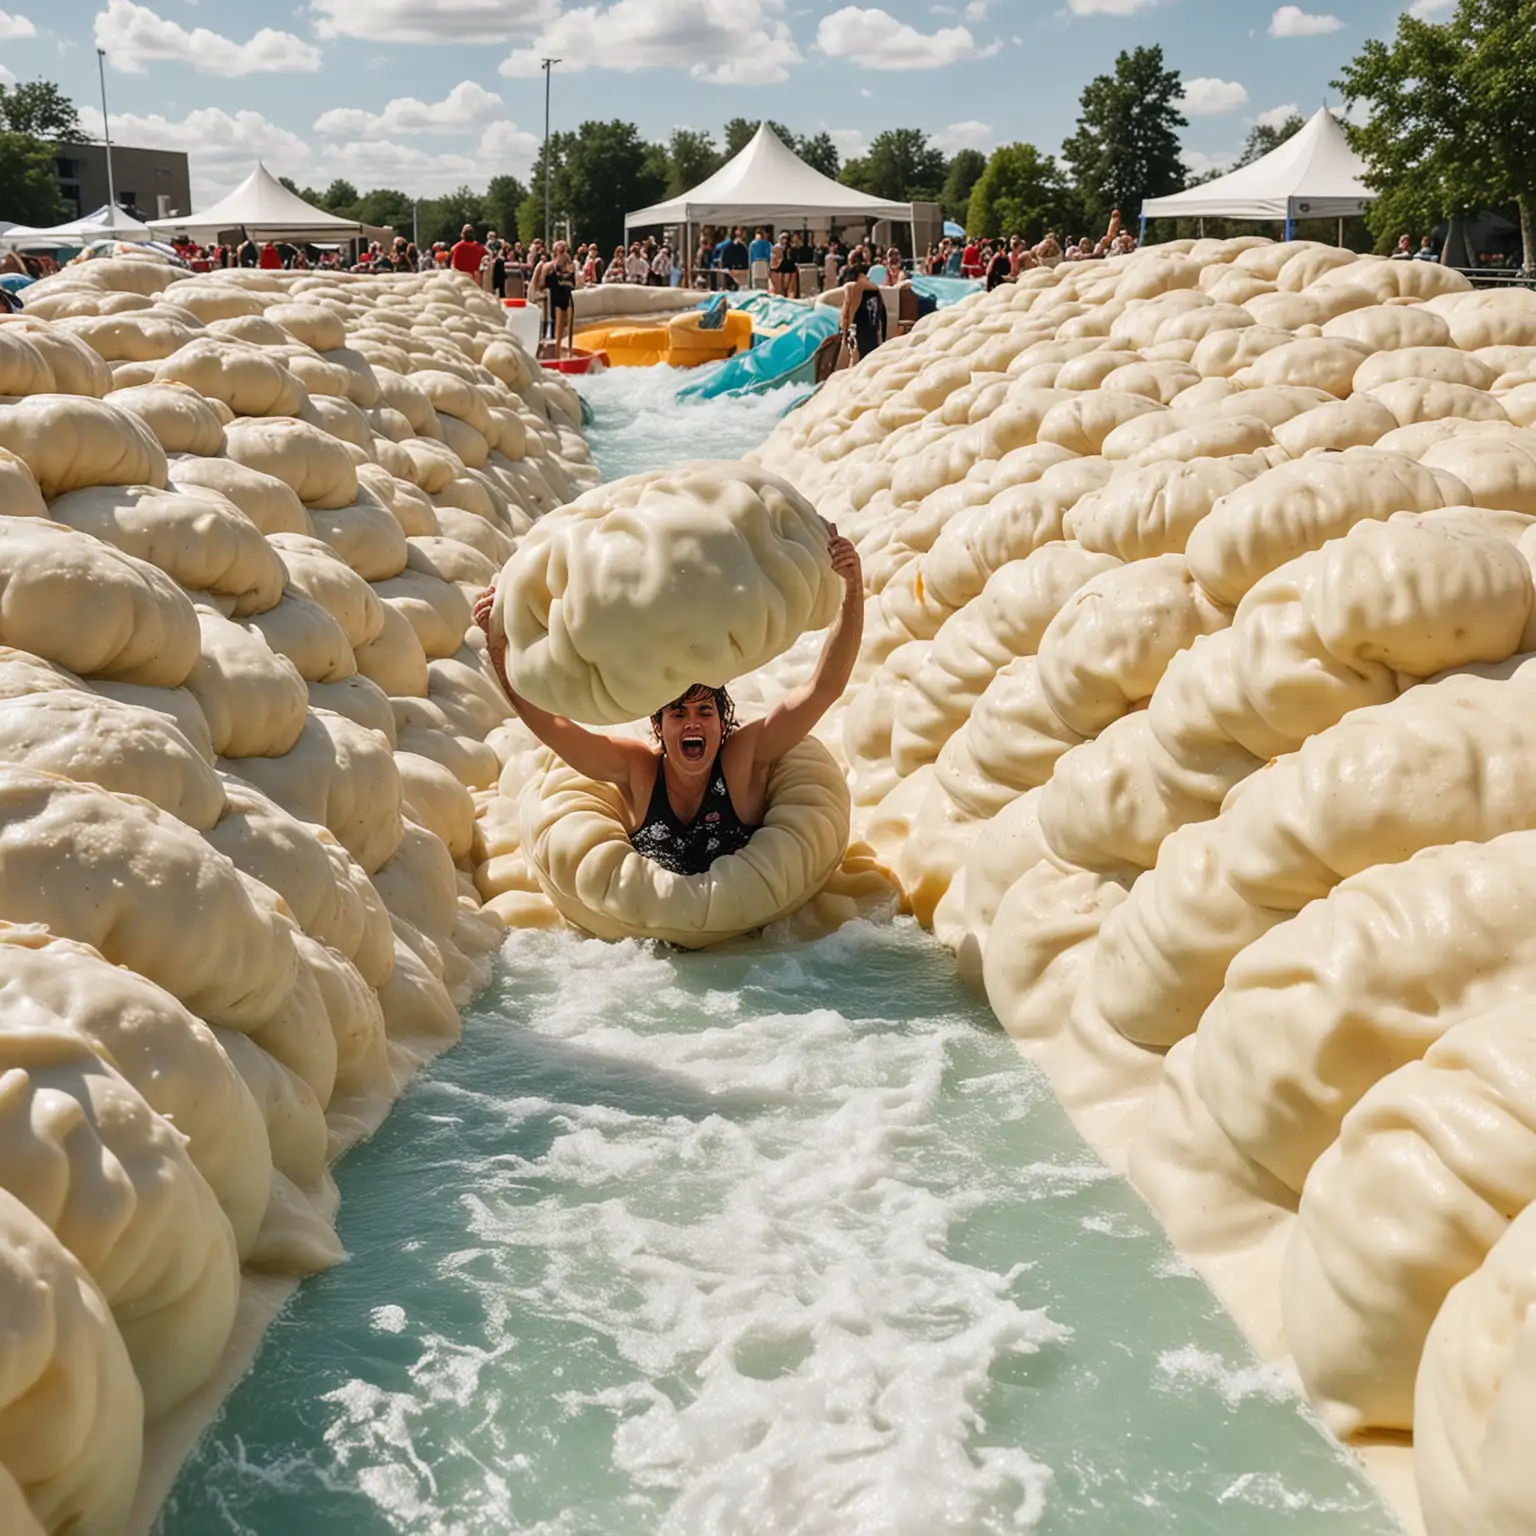 a person going down a water slide made from oversized dumplings